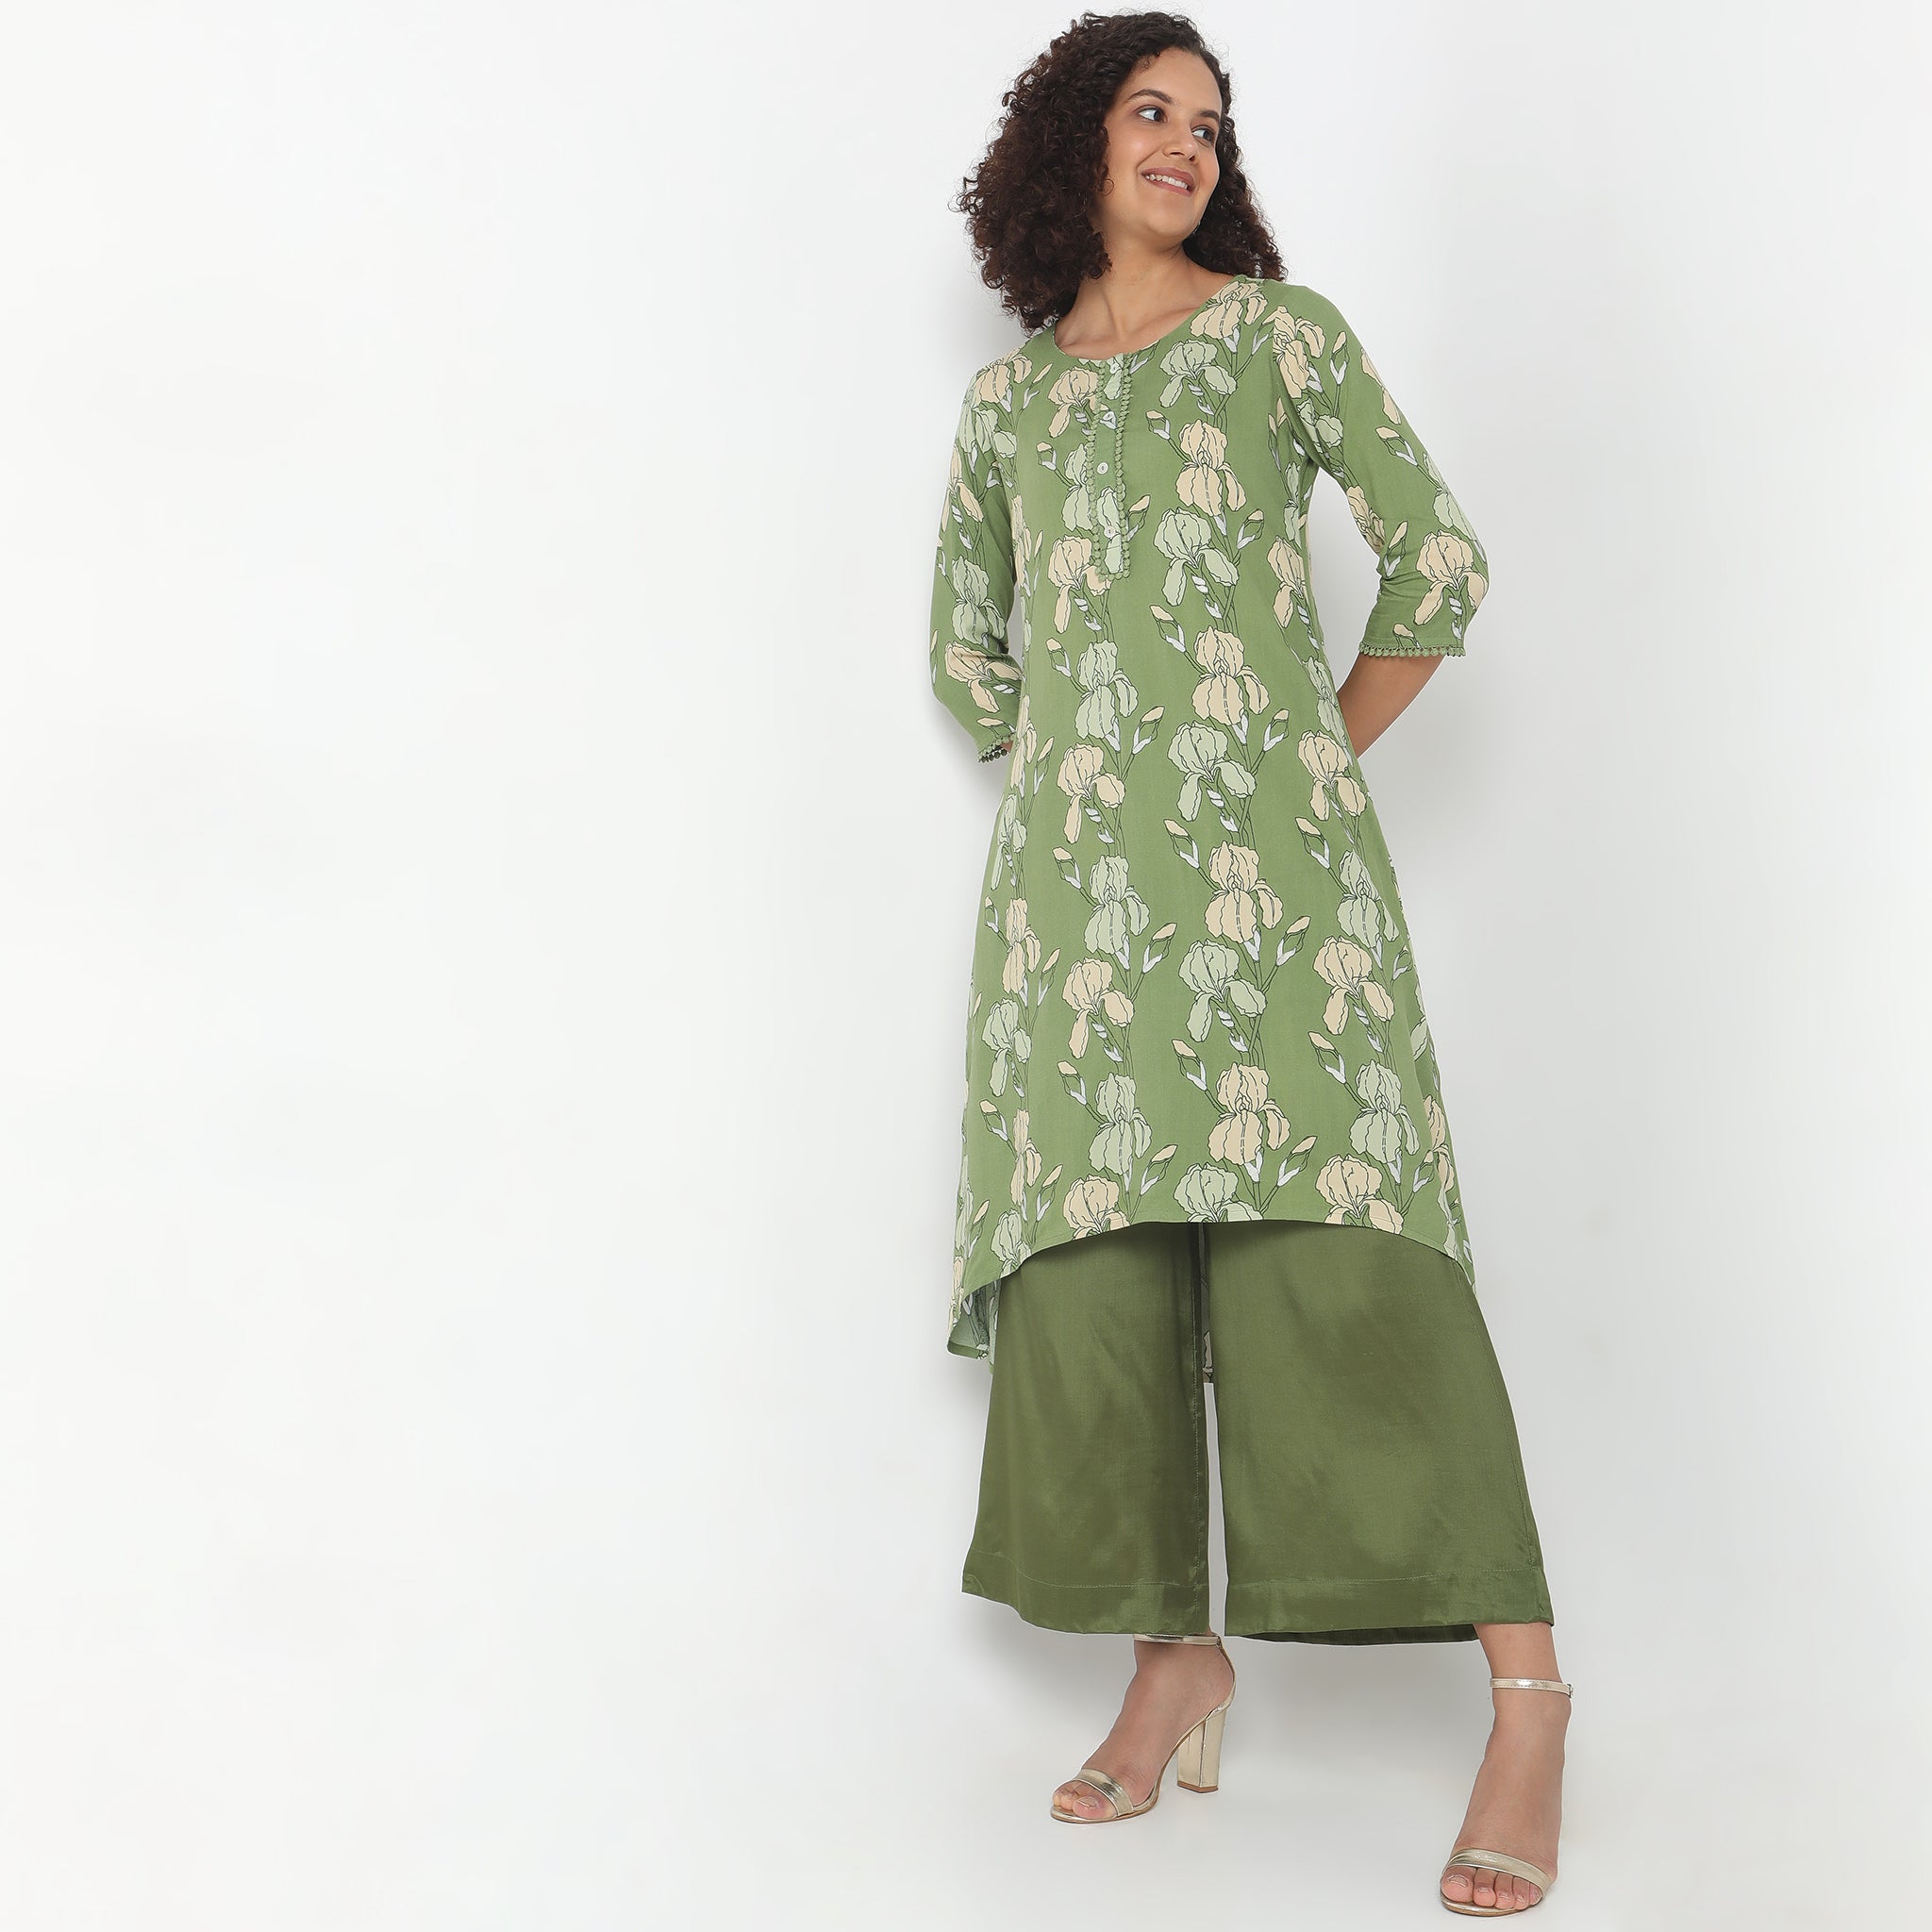 Do you shop Indian ethnic wear online? - Quora